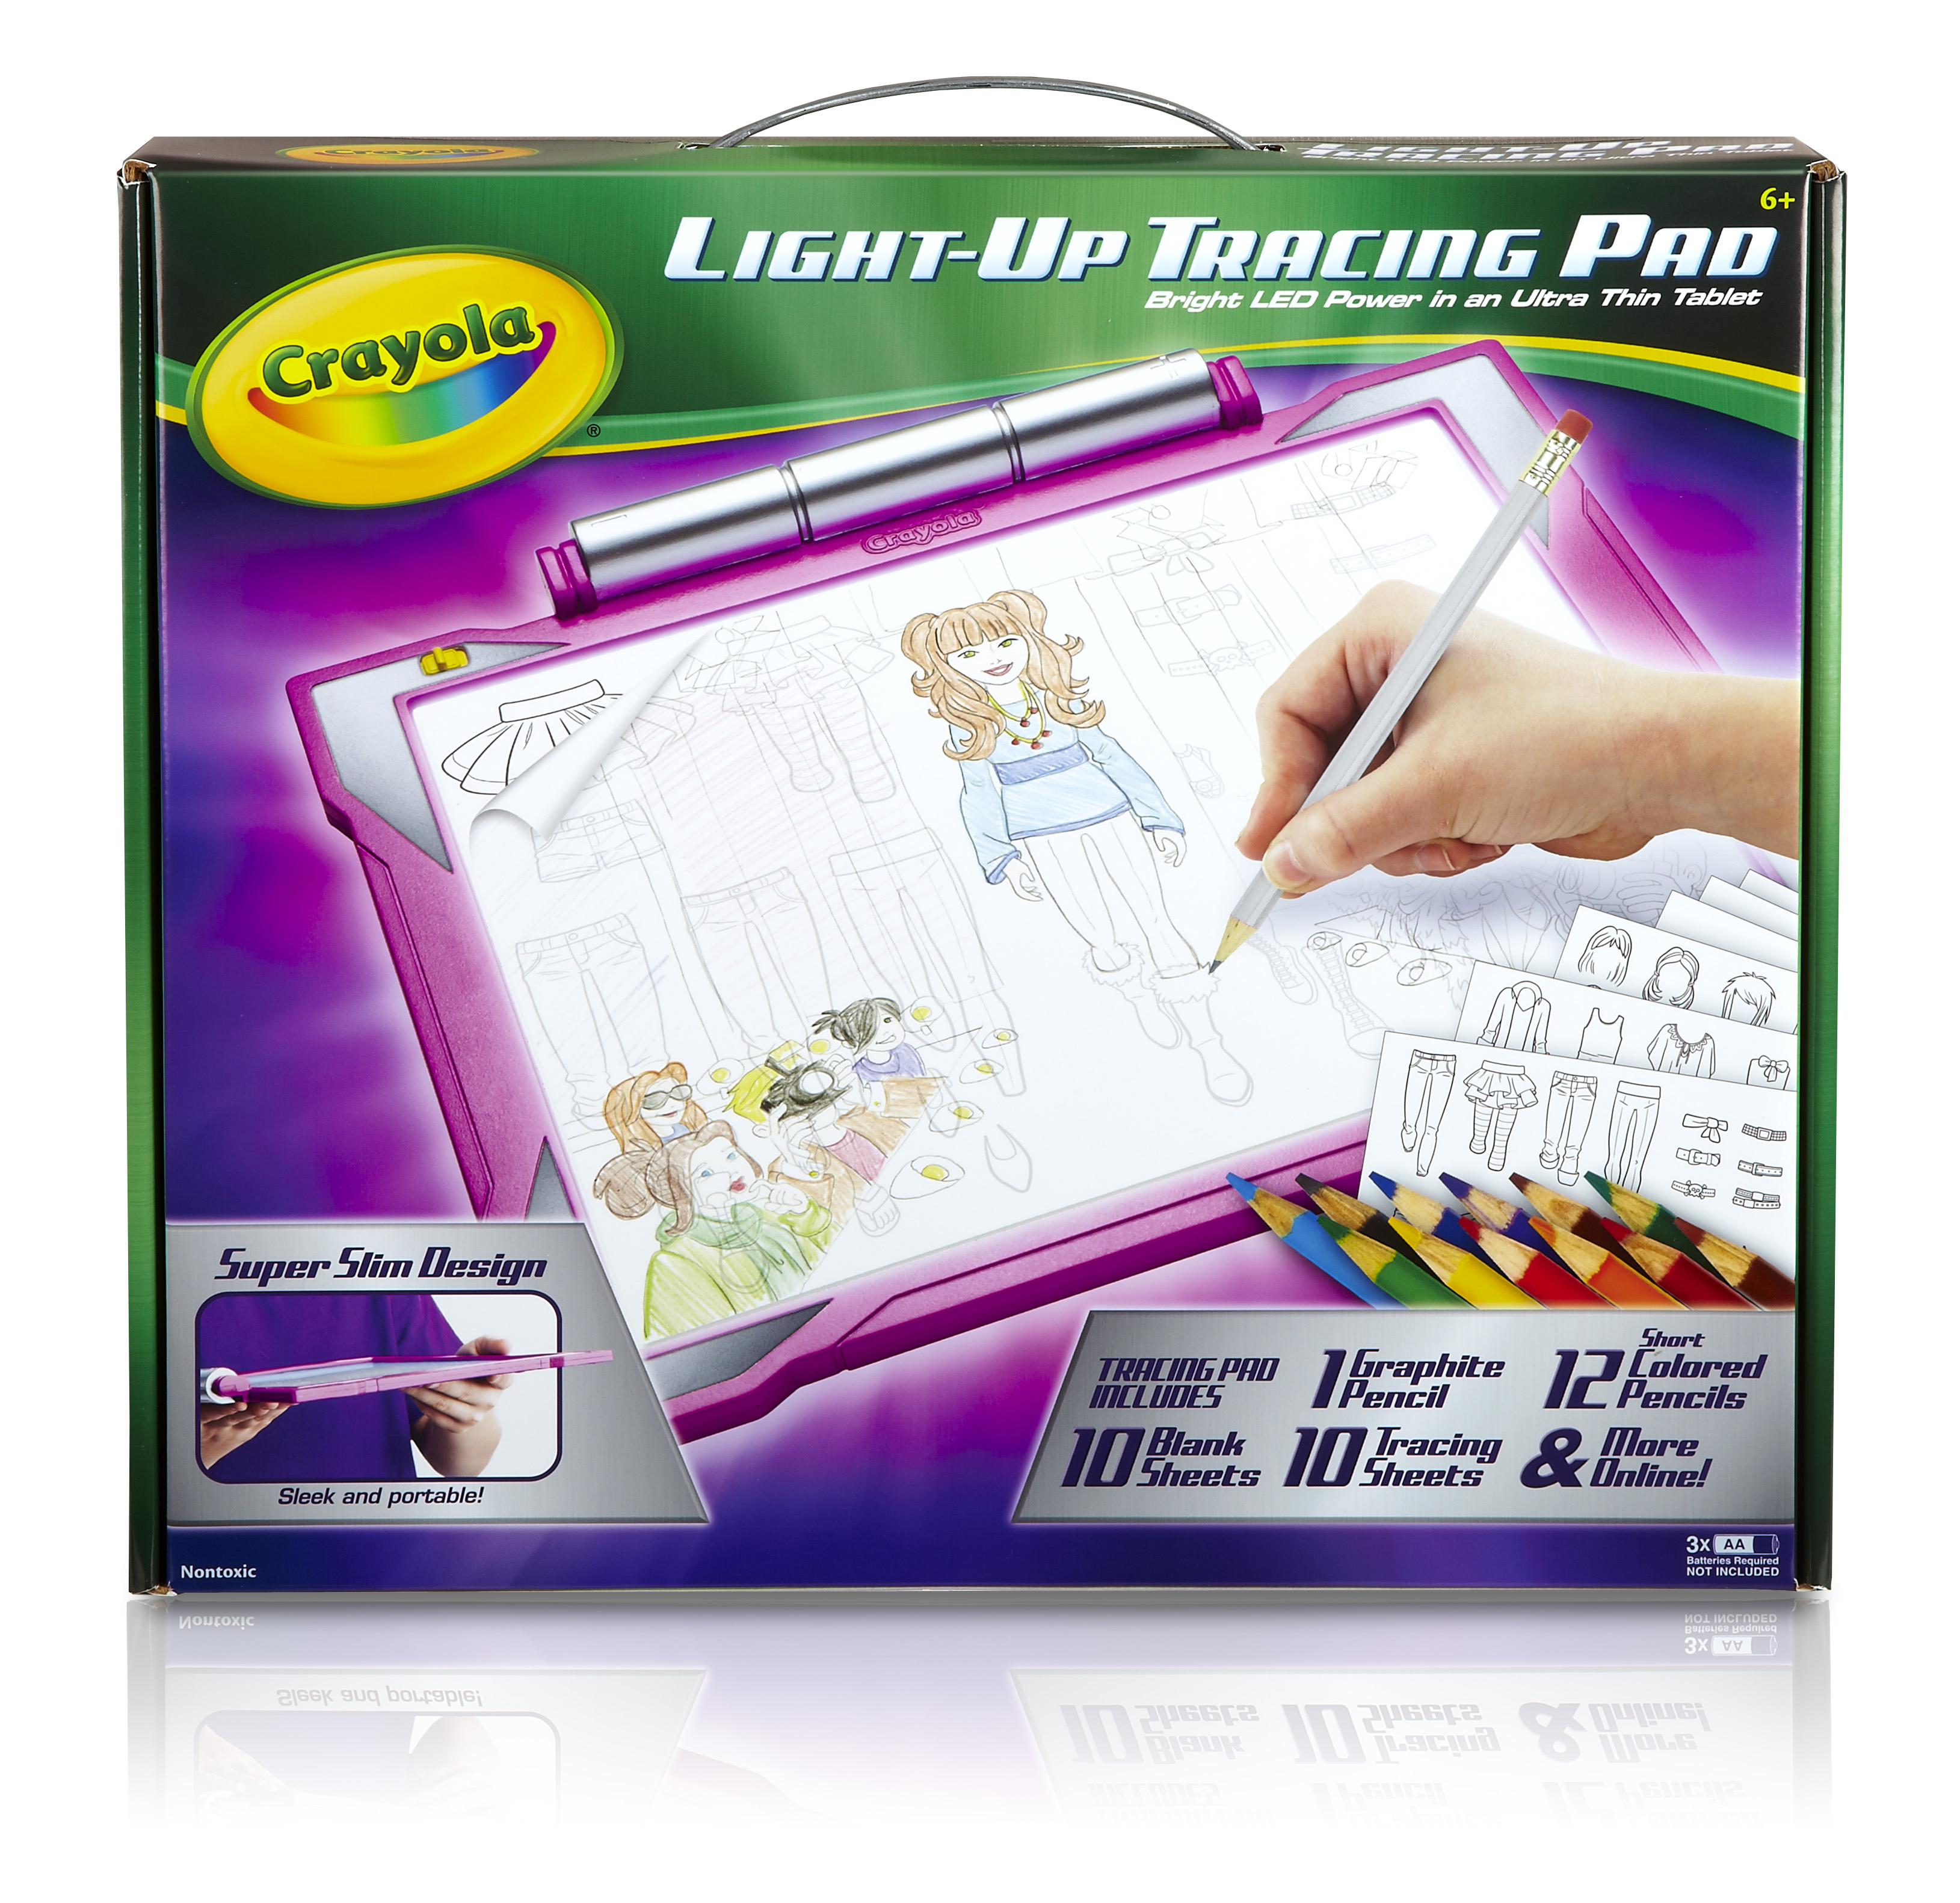 Crayola Light Up Tracing Pad PINK BRIGHT LED POWER in an Ultra Thin Tablet